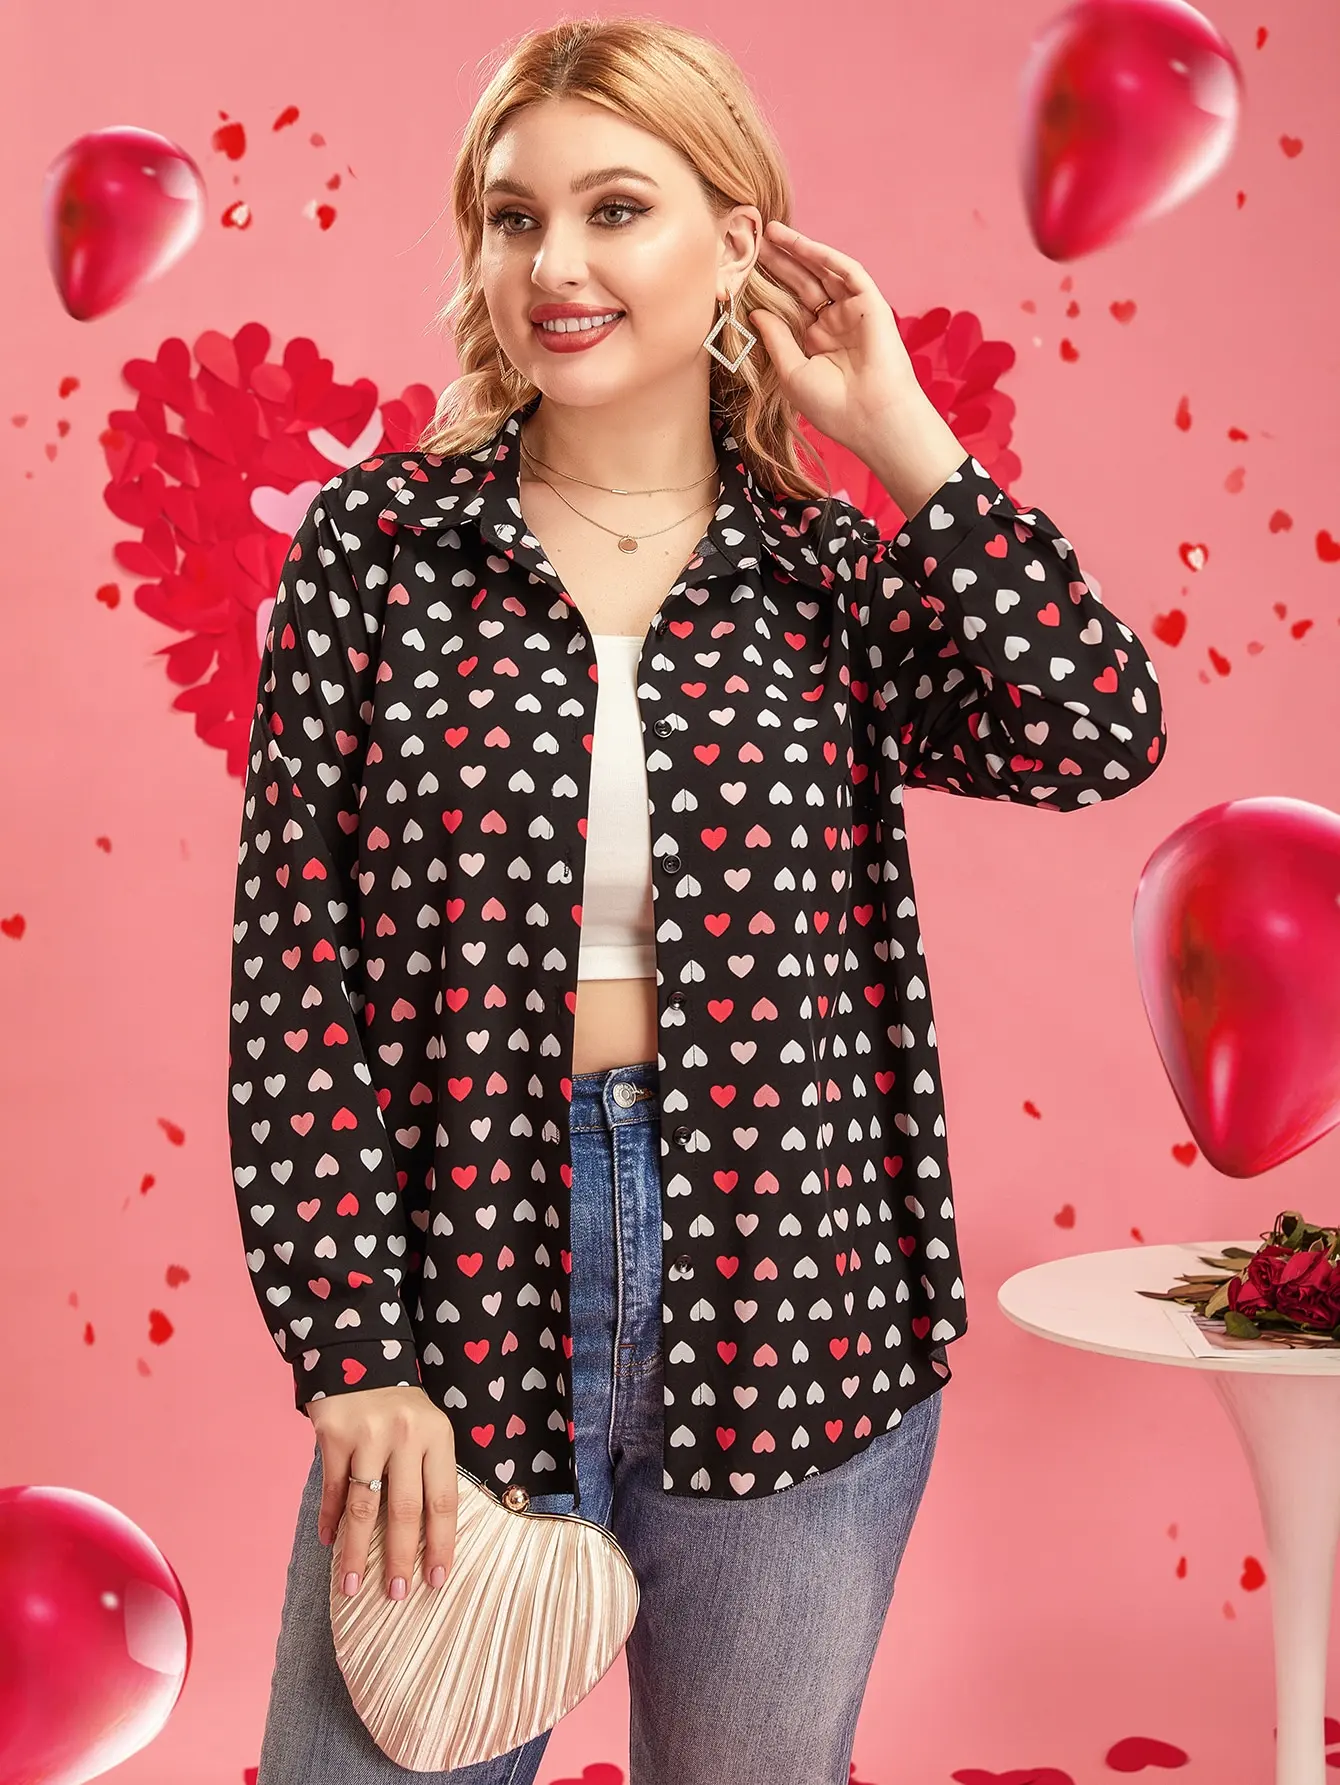 Plus Size Shirt 2022 Autumn New Heart Print Blouses Women Long Sleeve Turn-down Collar Blouse Casual Tops Fashion Y2k Clothing